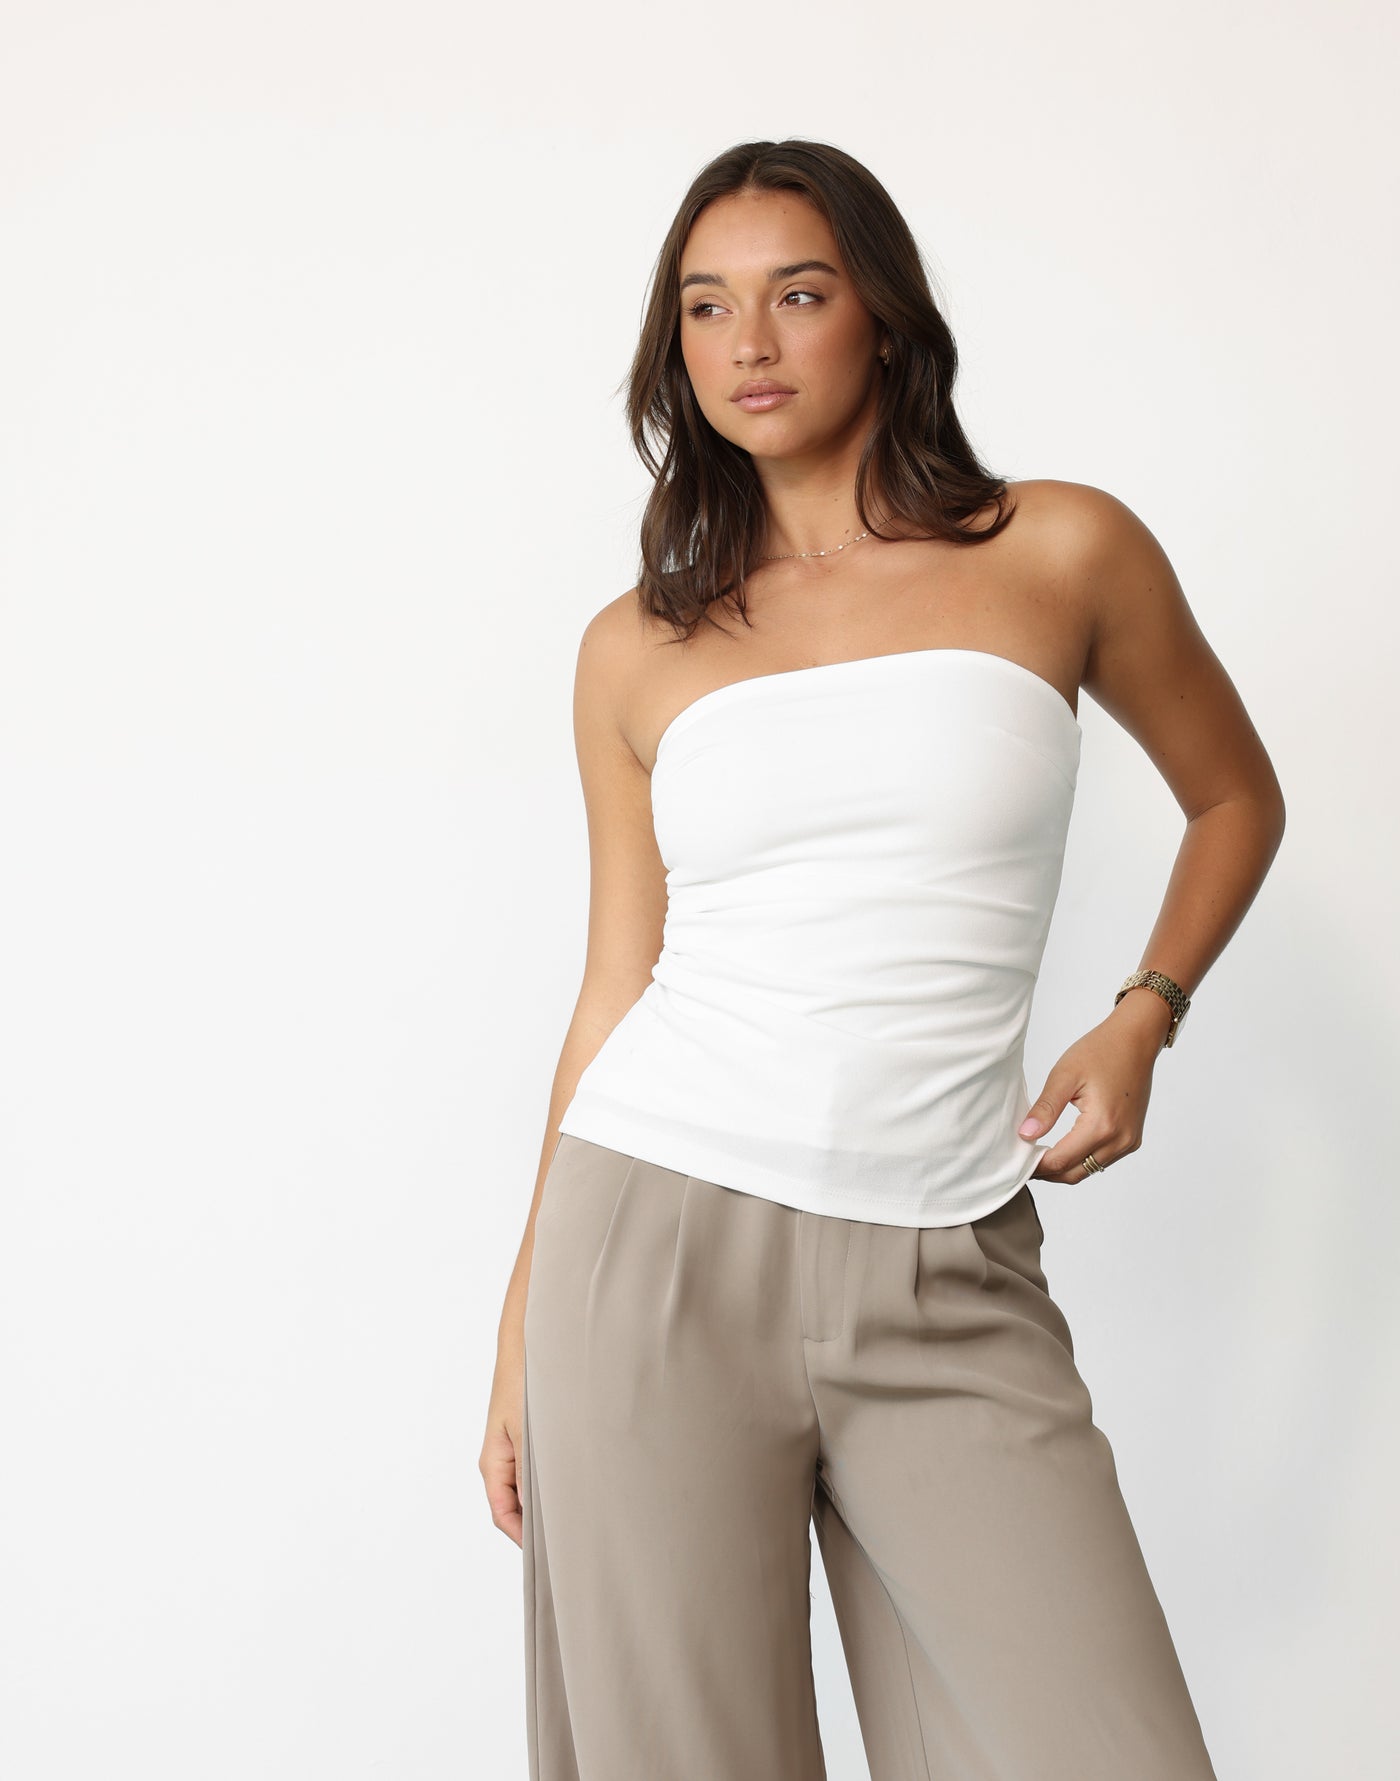 Reverie Top (White) - Strapless Tube Style Longline Top - Women's Top - Charcoal Clothing